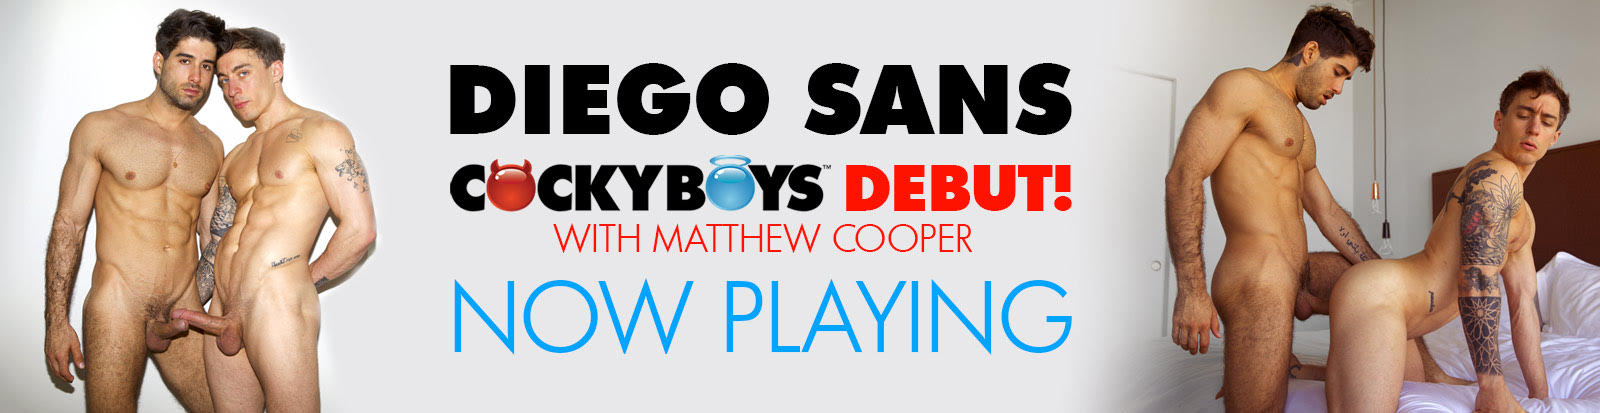 Diego Sans Is on CockyBoys!